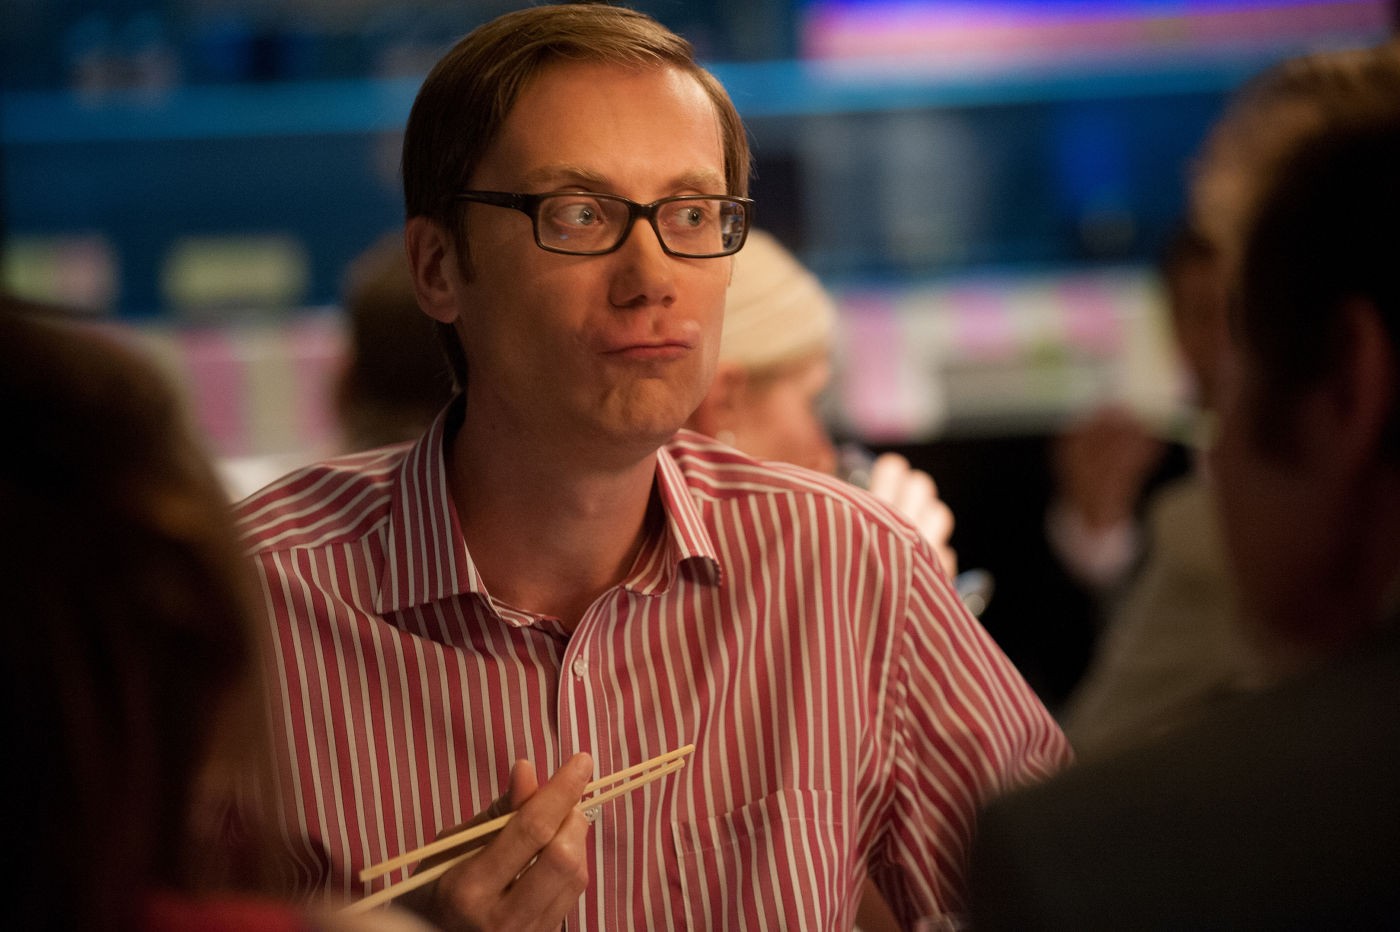 Stephen Merchant in Magnolia Pictures' I Give It a Year (2013). Photo credit by Giles Keyte.